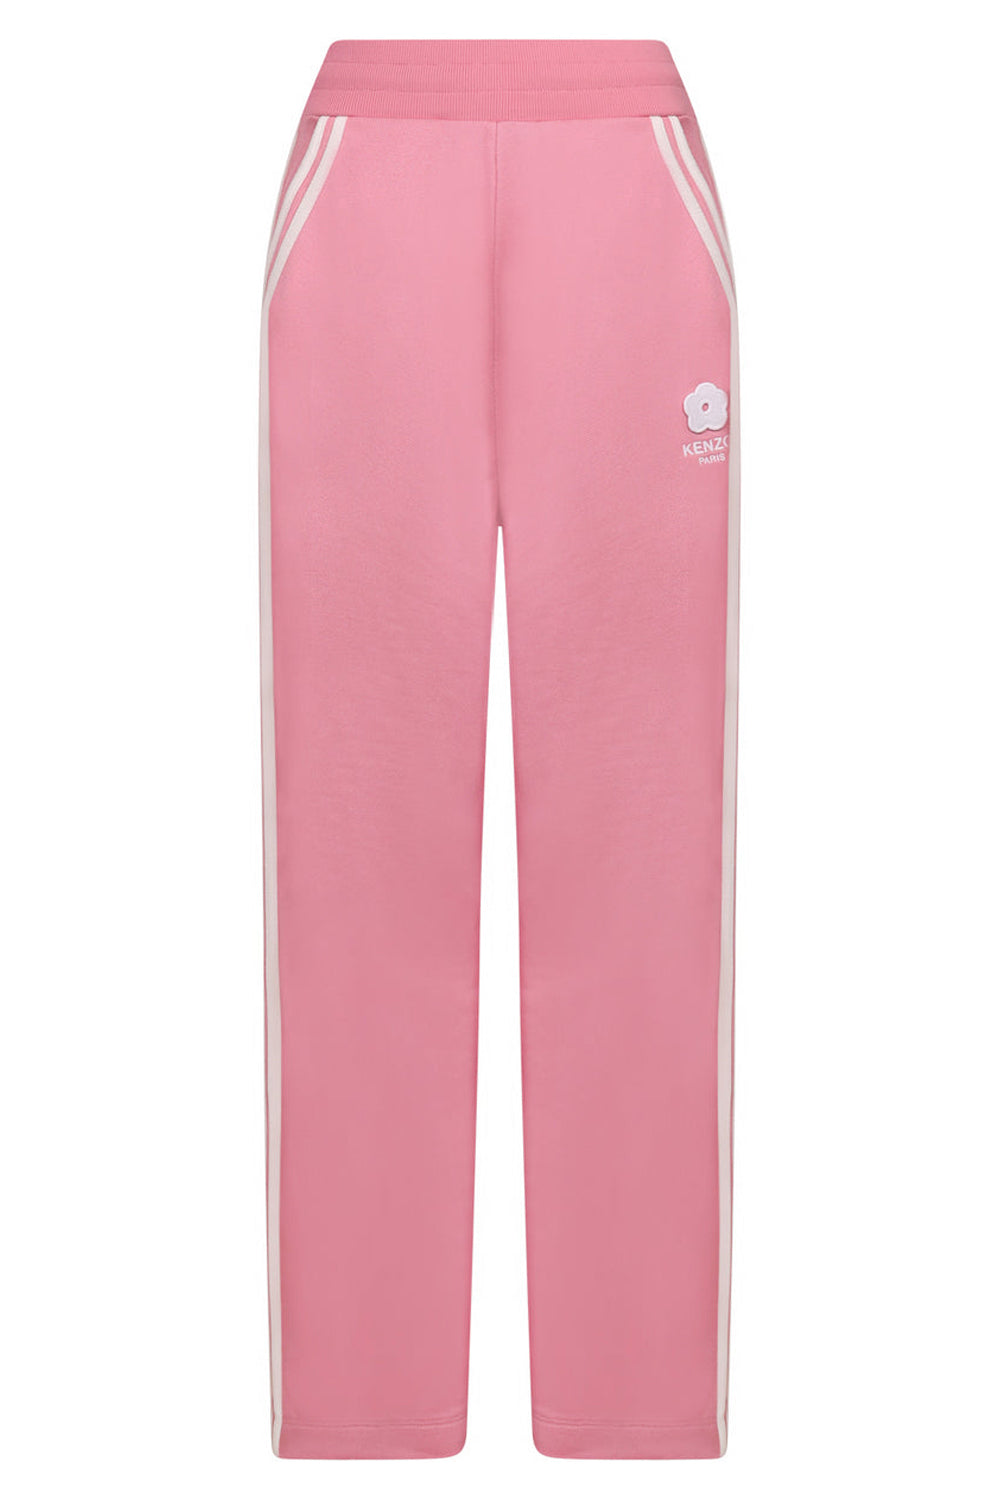 KENZO RTW TRACKPANTS WITH POPPERS | ROSE